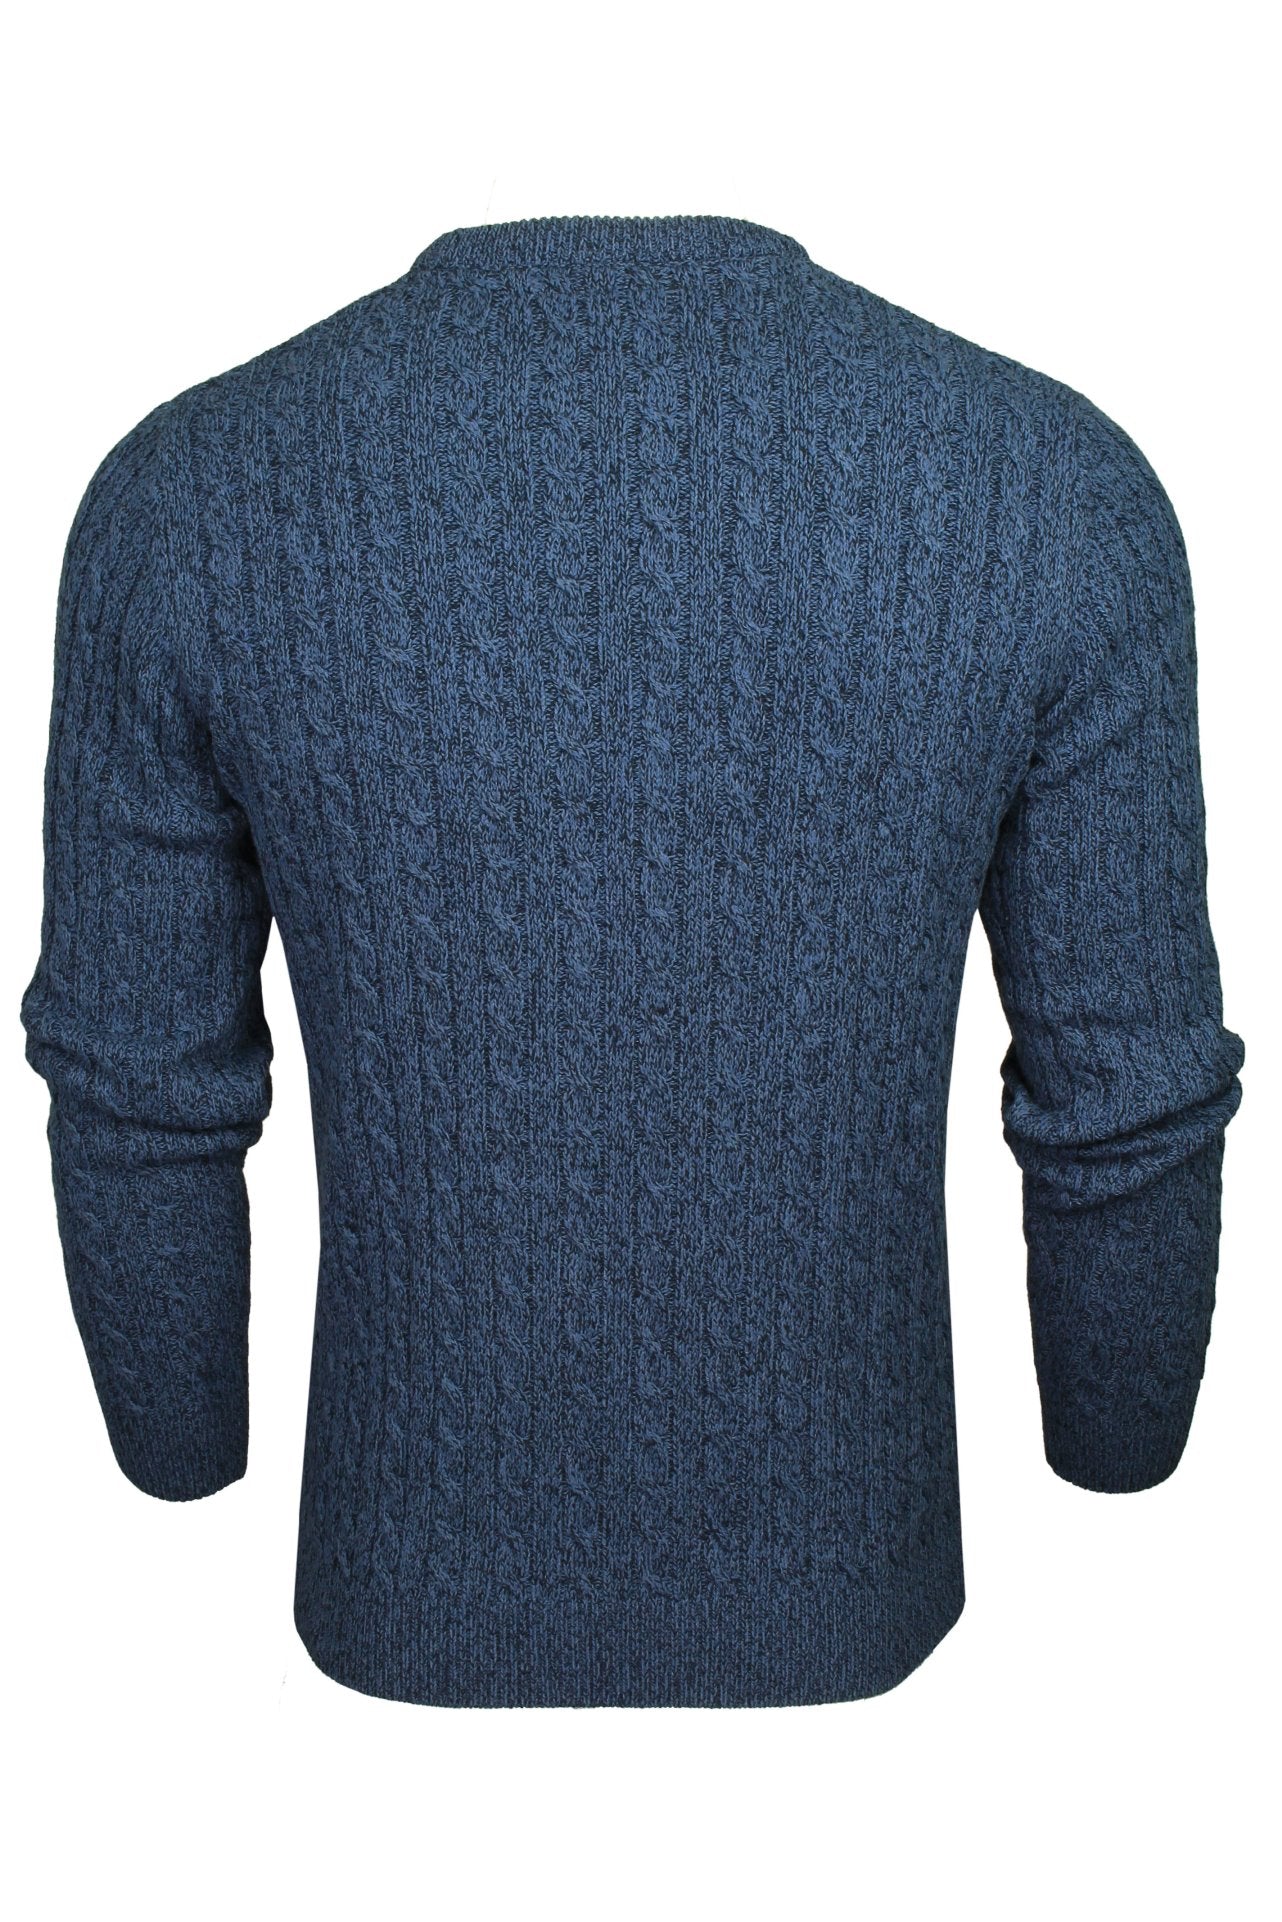 Xact Men's Sustainable Cotton Rich Cable Knit Jumper-3